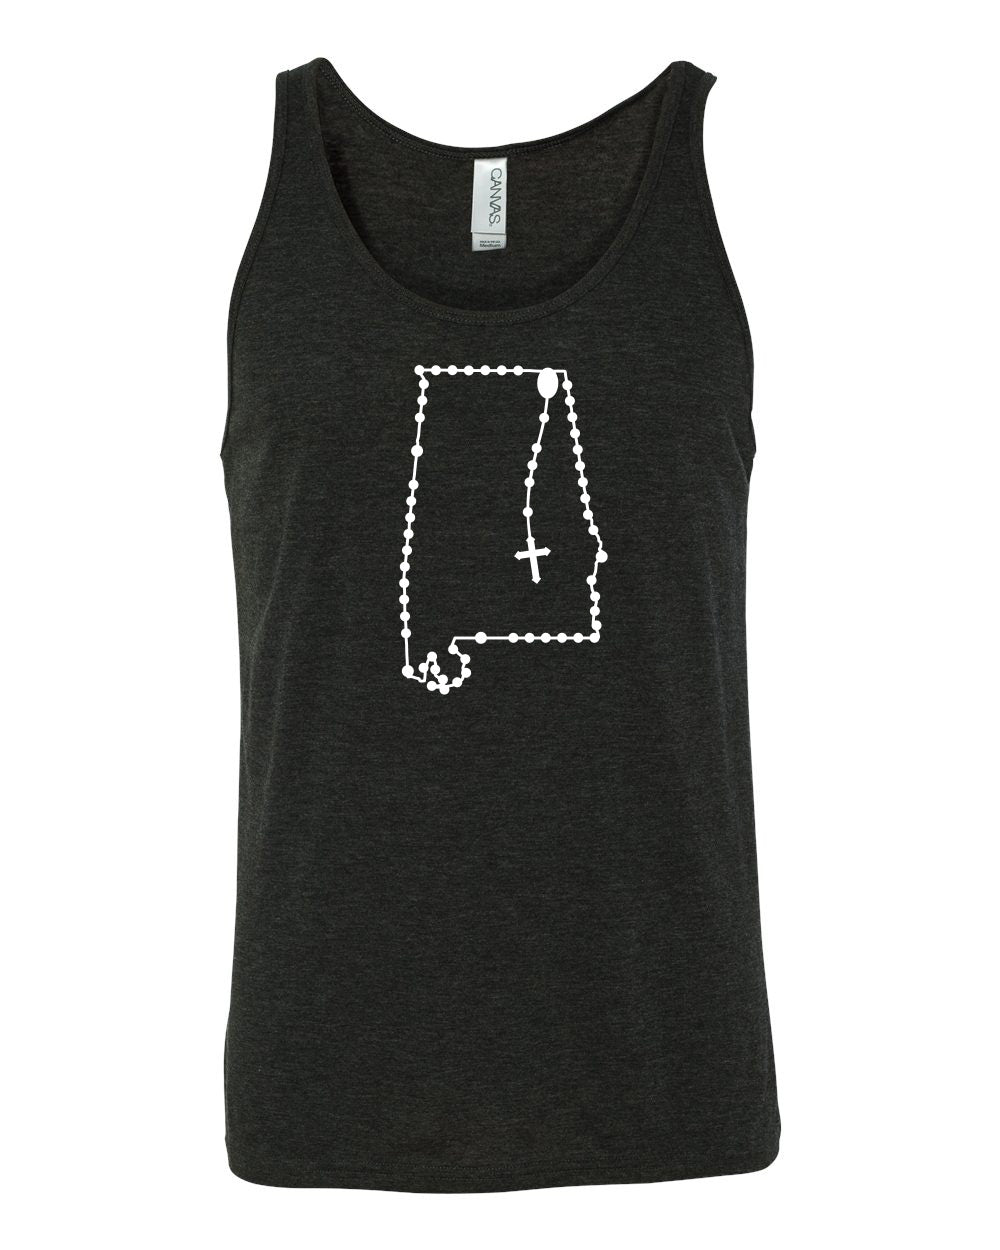 Alabama State Catholic Rosary custom tank tops for women, canvas bella, mens tank tops, muscle tee, bro tank, Gift, State Pride-front-heathered charcoal gray tank